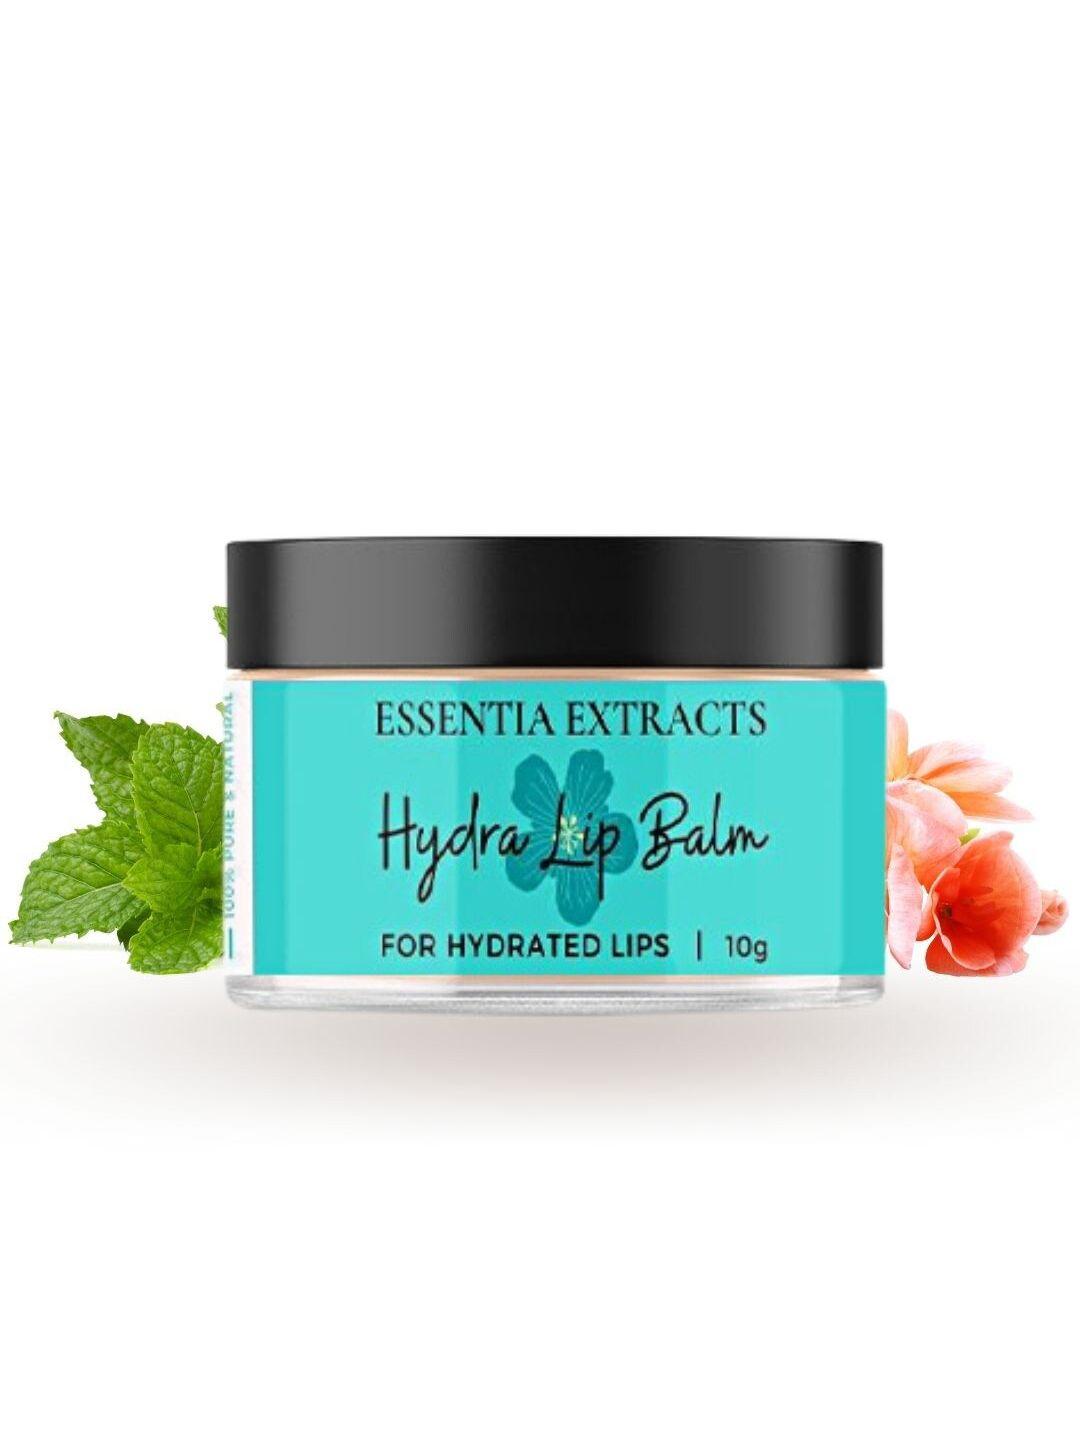 essentia extracts hydra lip balm for hydrated lips with shea butter - 10 g